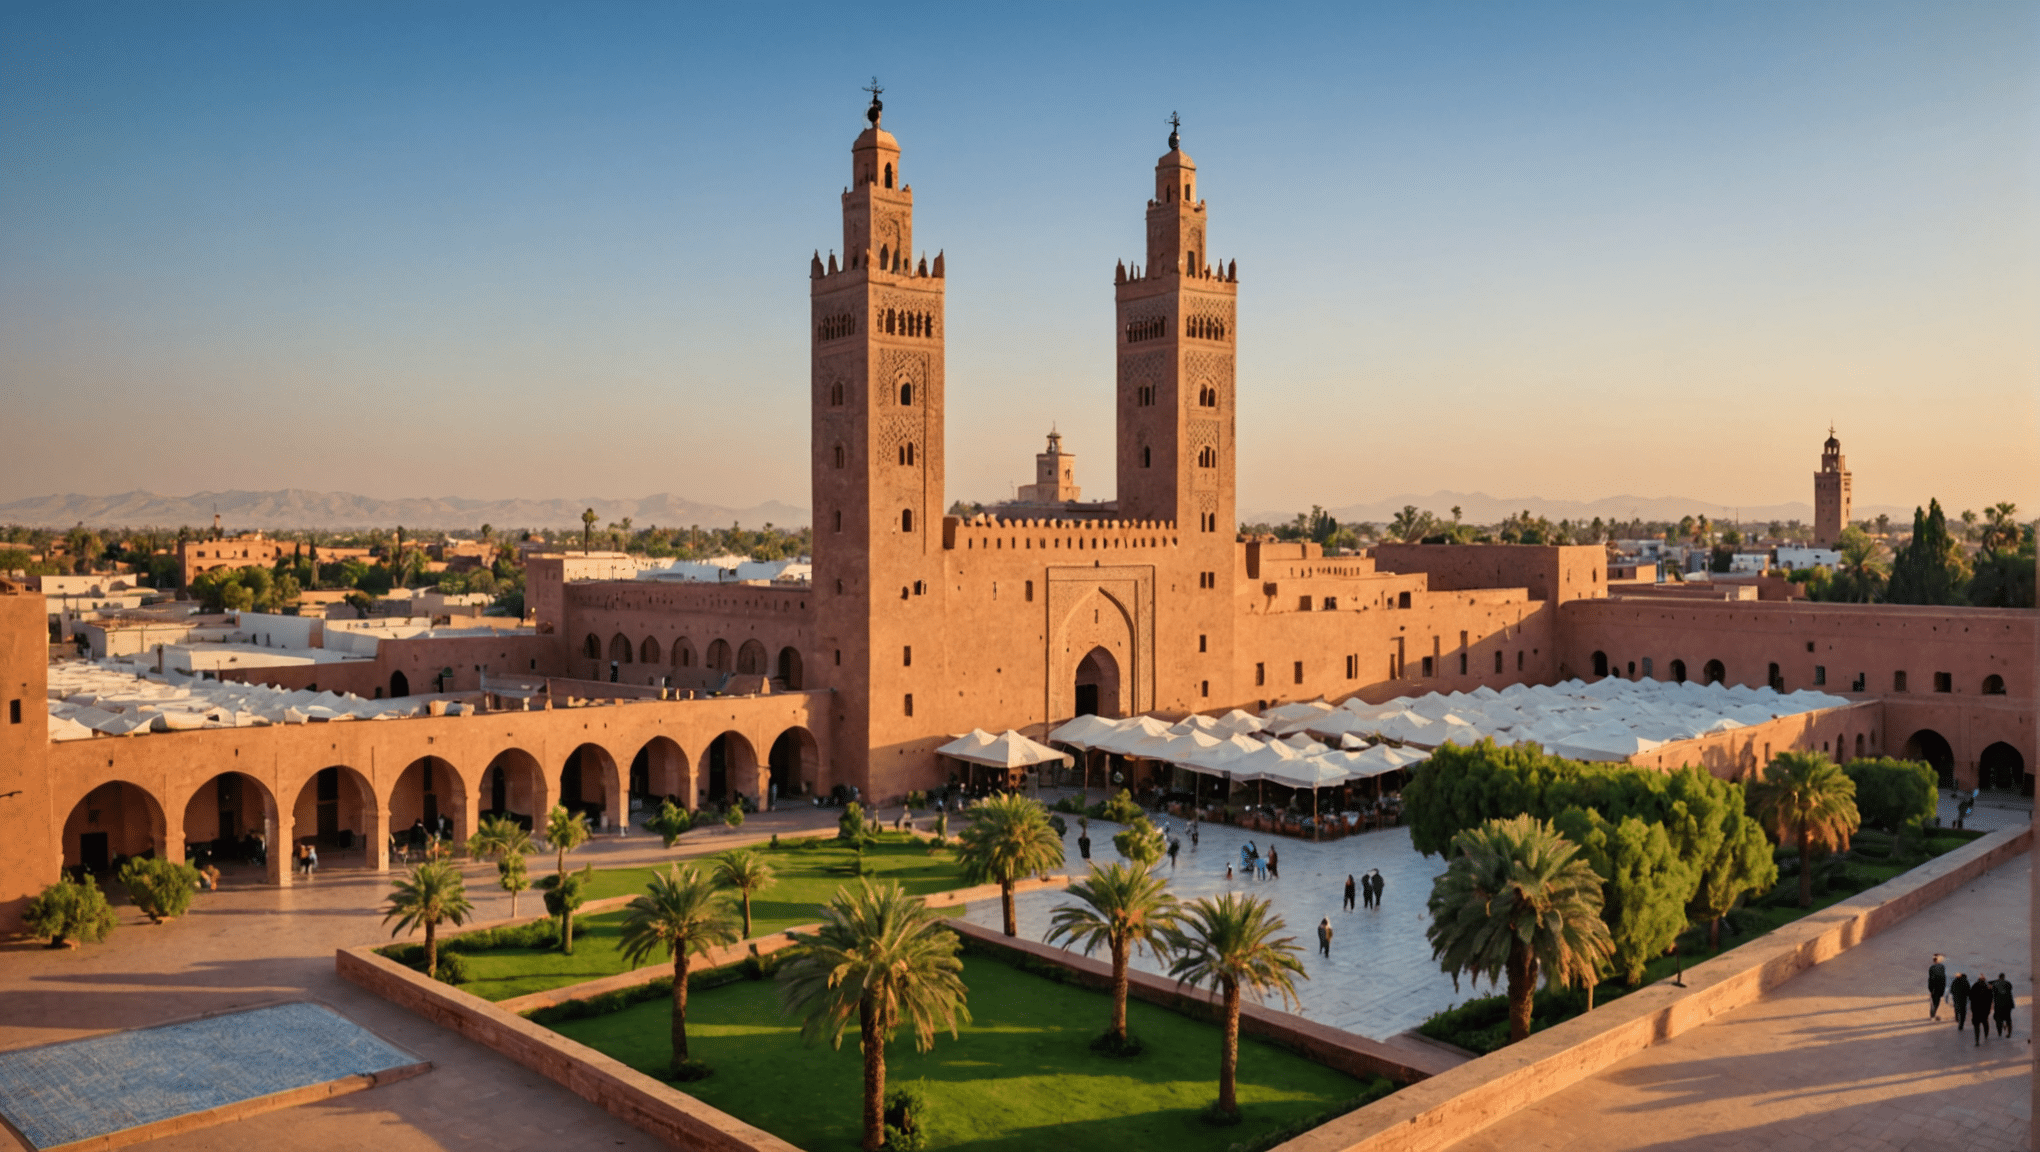 discover the historical and cultural importance of the koutoubia mosque in marrakech and its impact on the city's identity and architecture.